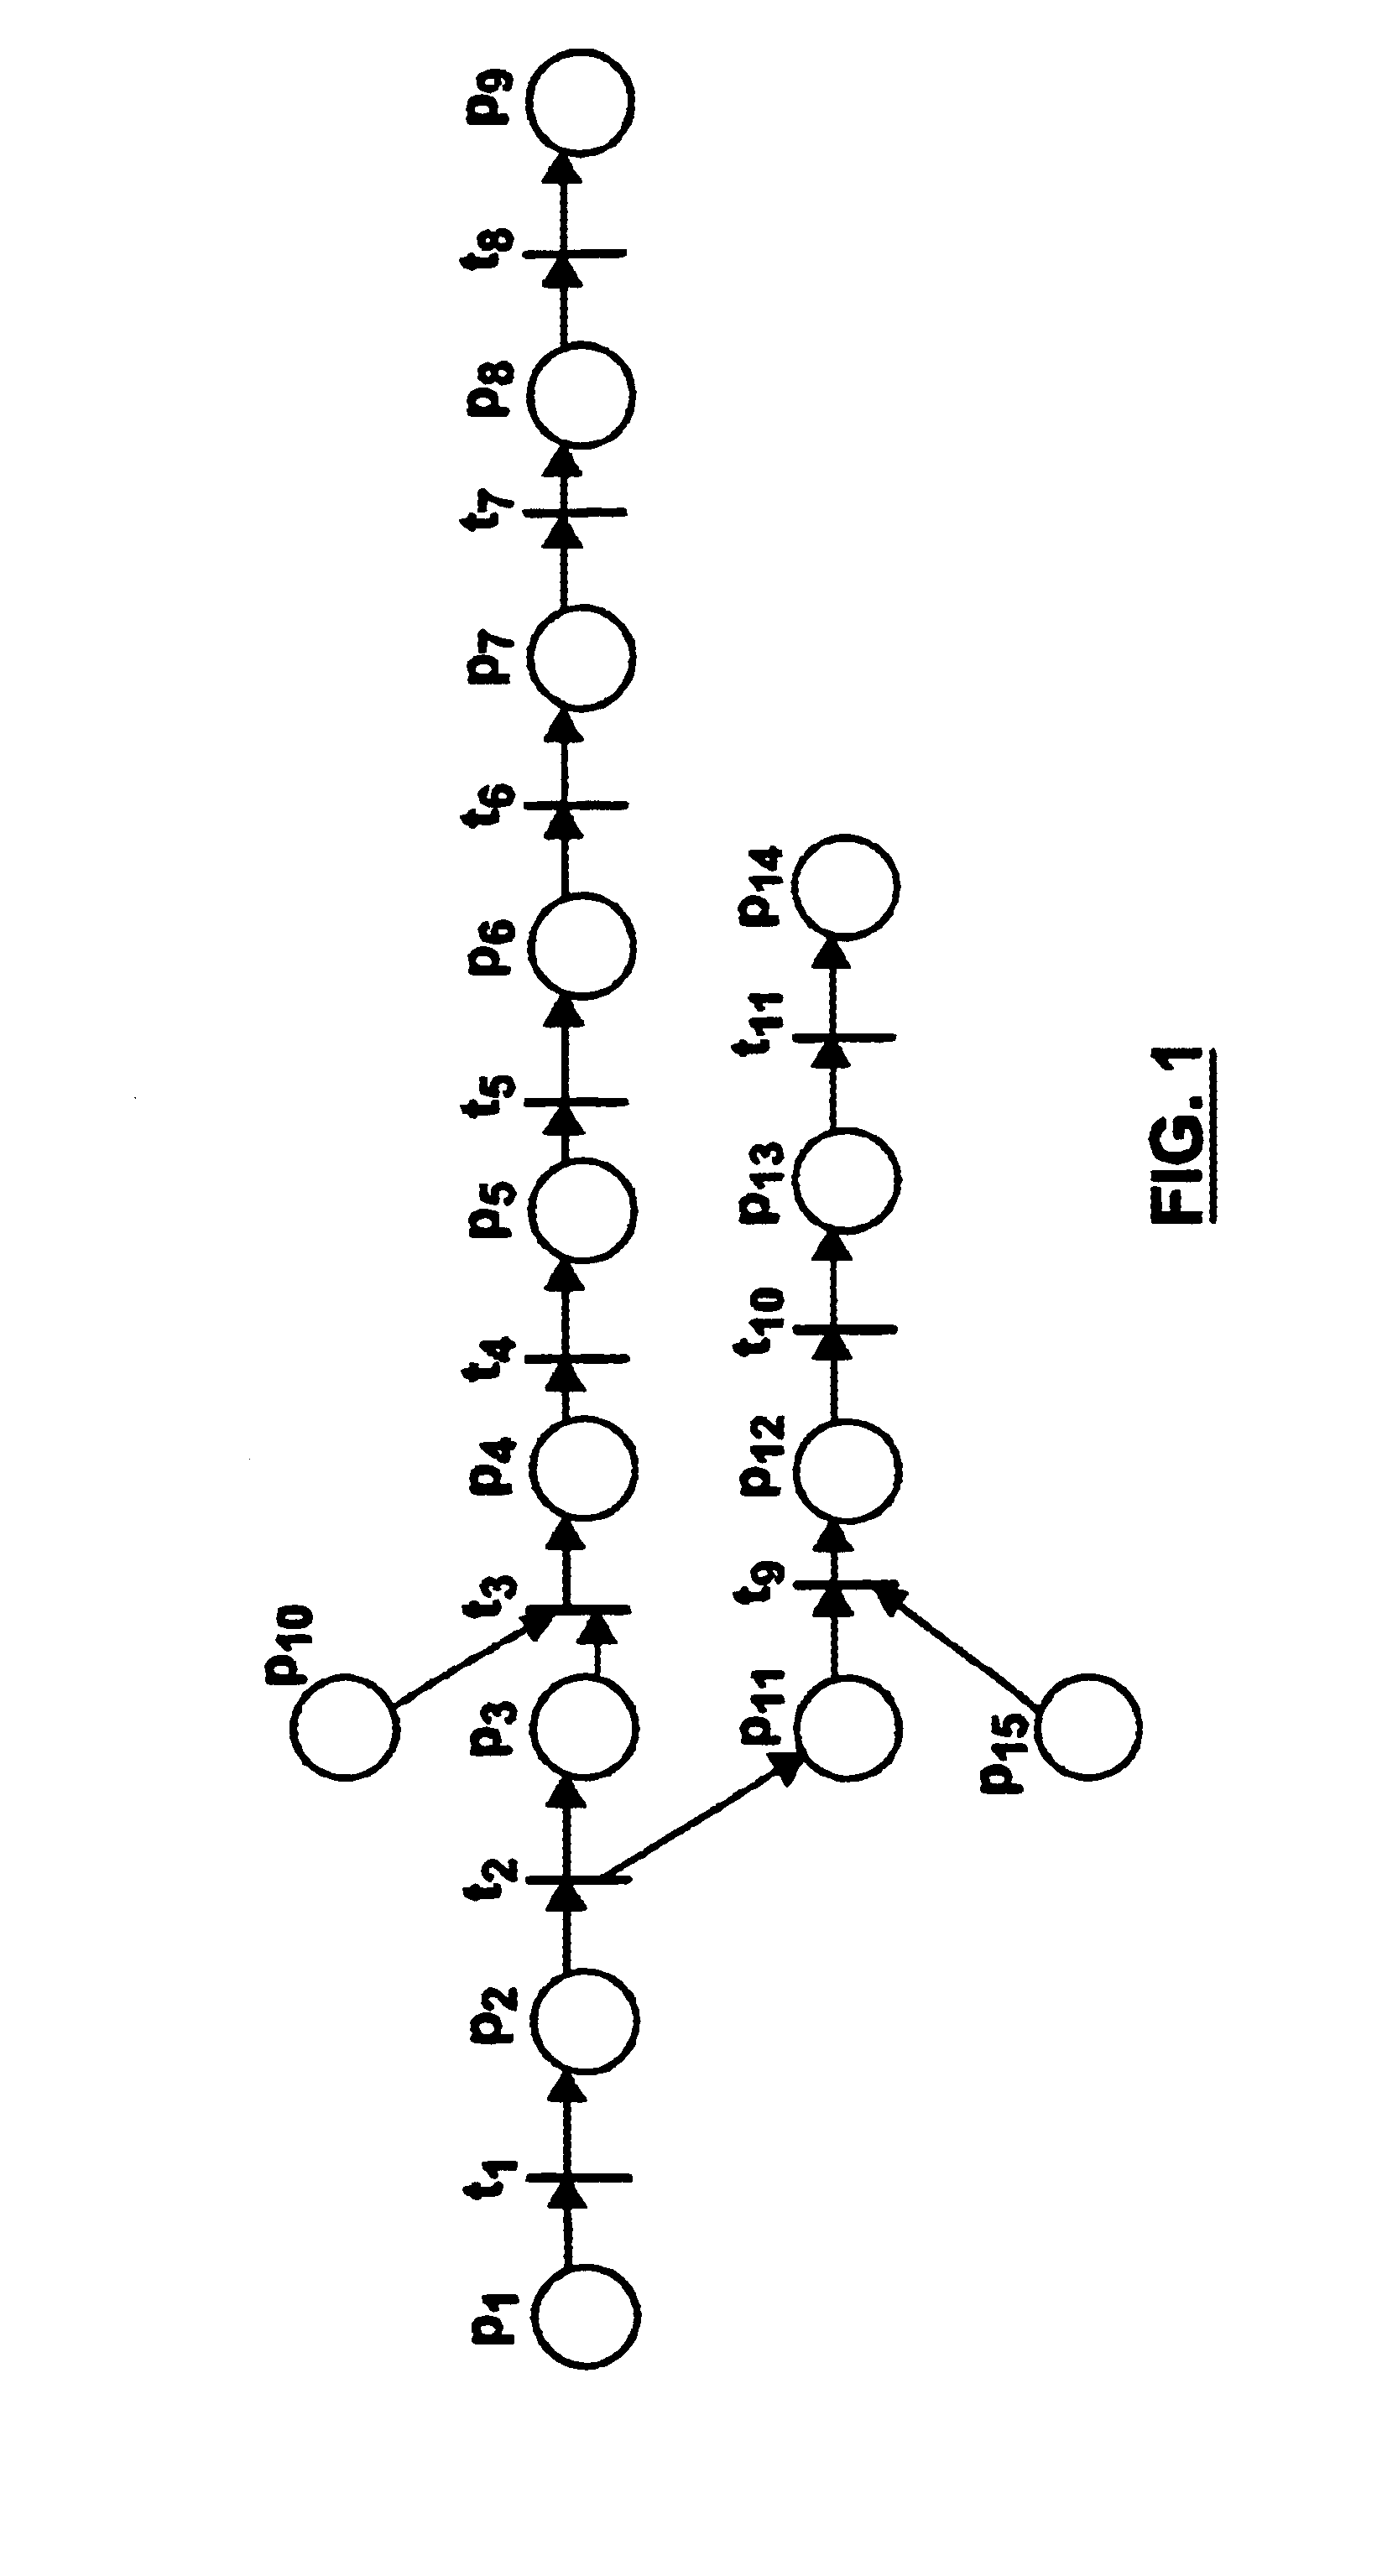 Universal verification and validation system and method of computer-aided software quality assurance and testing